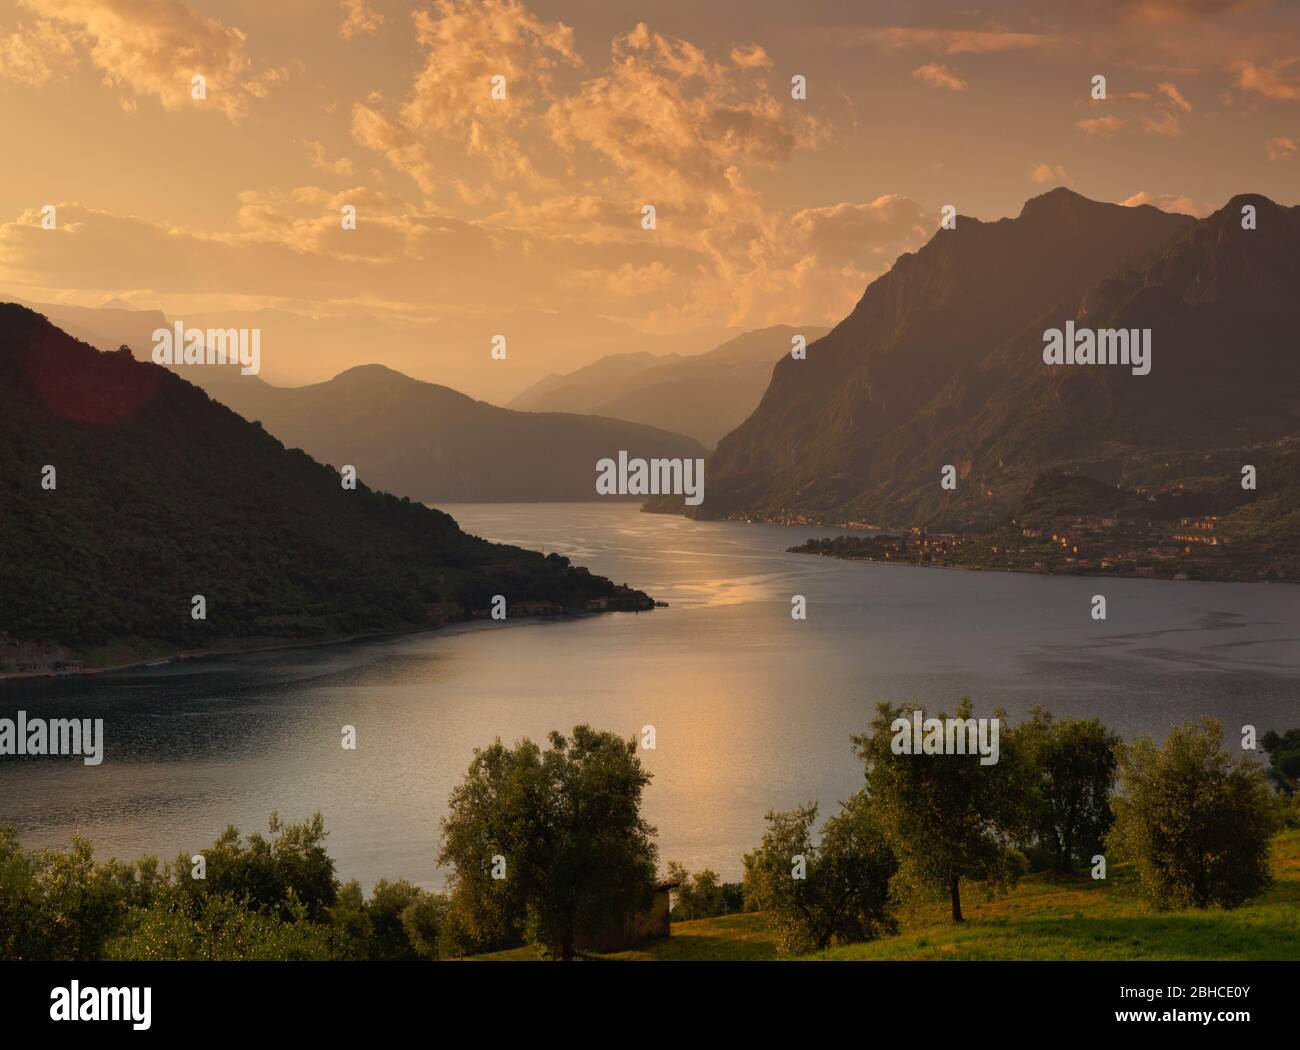 Lake Iseo or Lago d'Iseo, Lombardy, Italy. Stock Photo